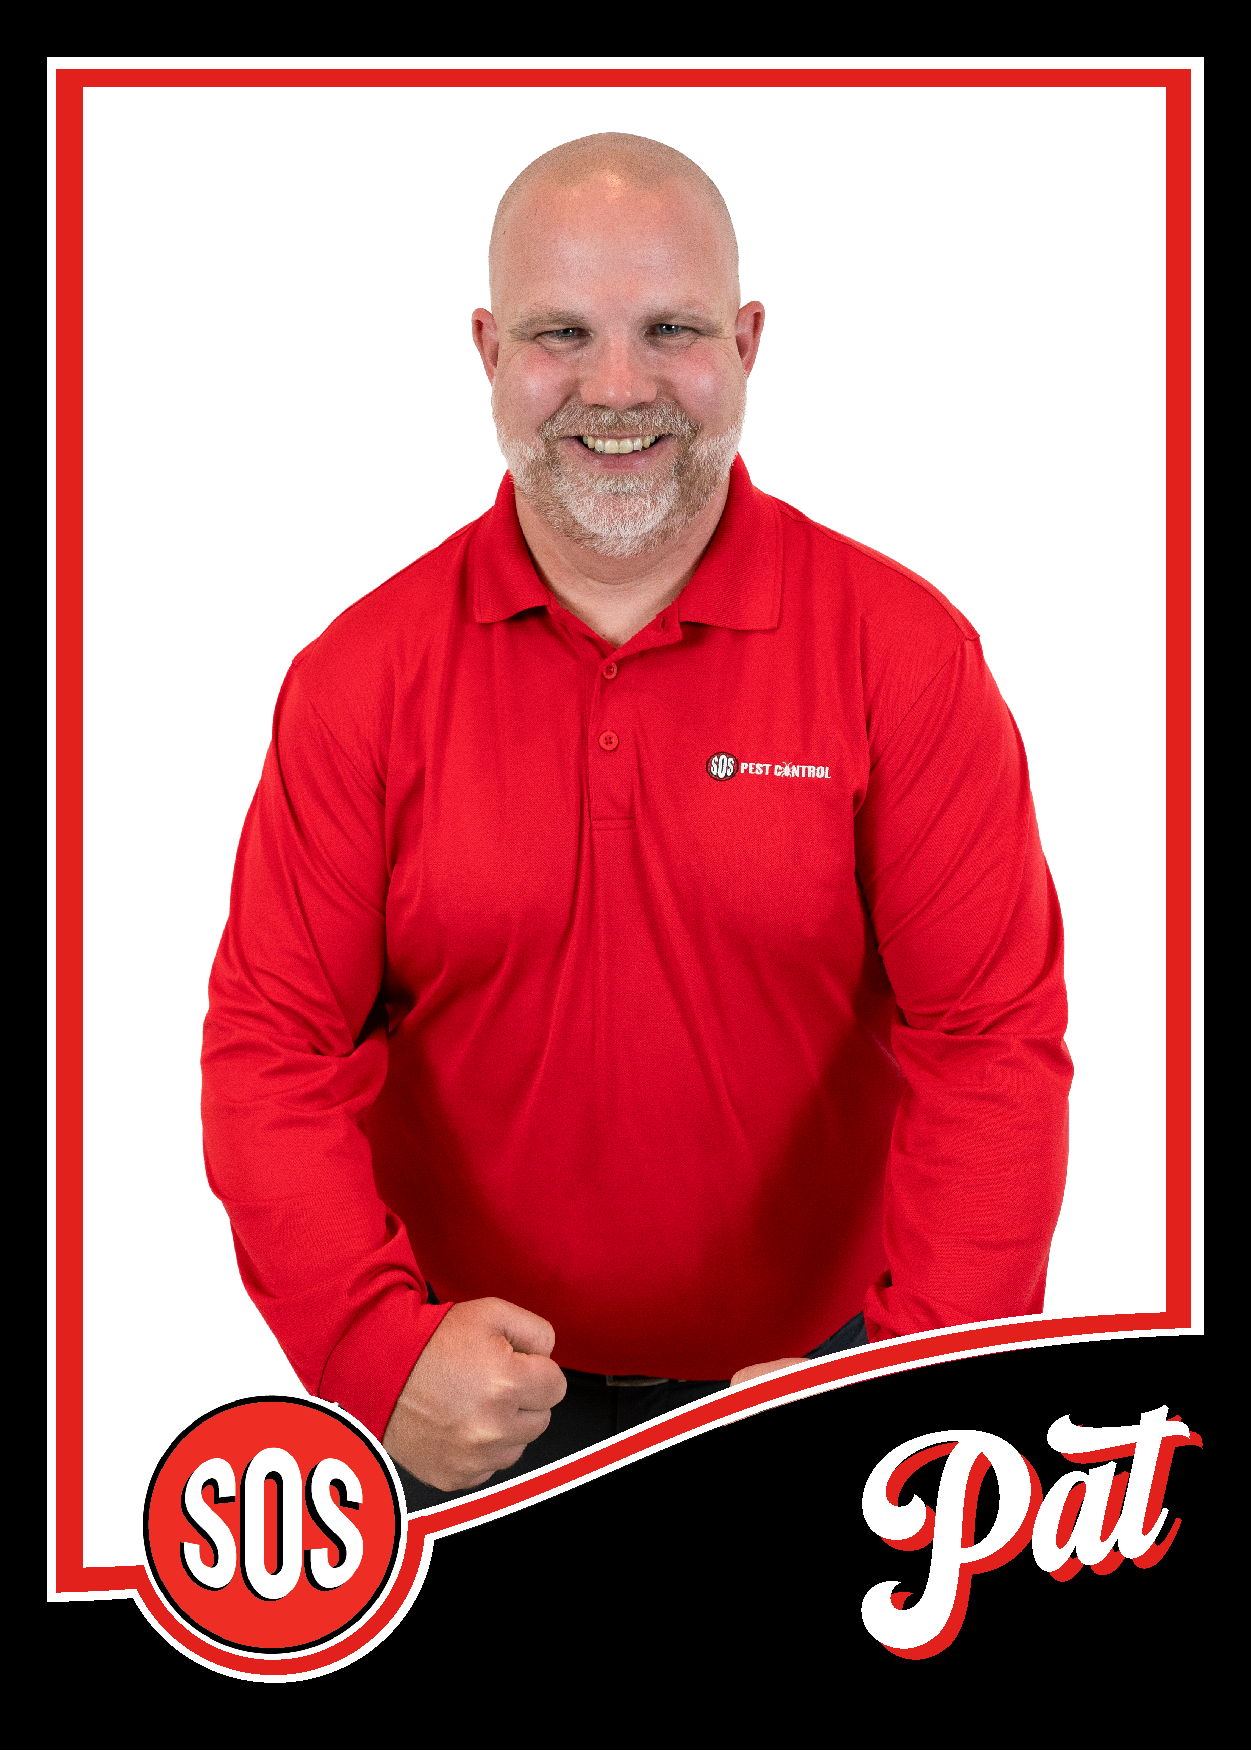 Jeff is a commercial service manager standing while flexing his arms.